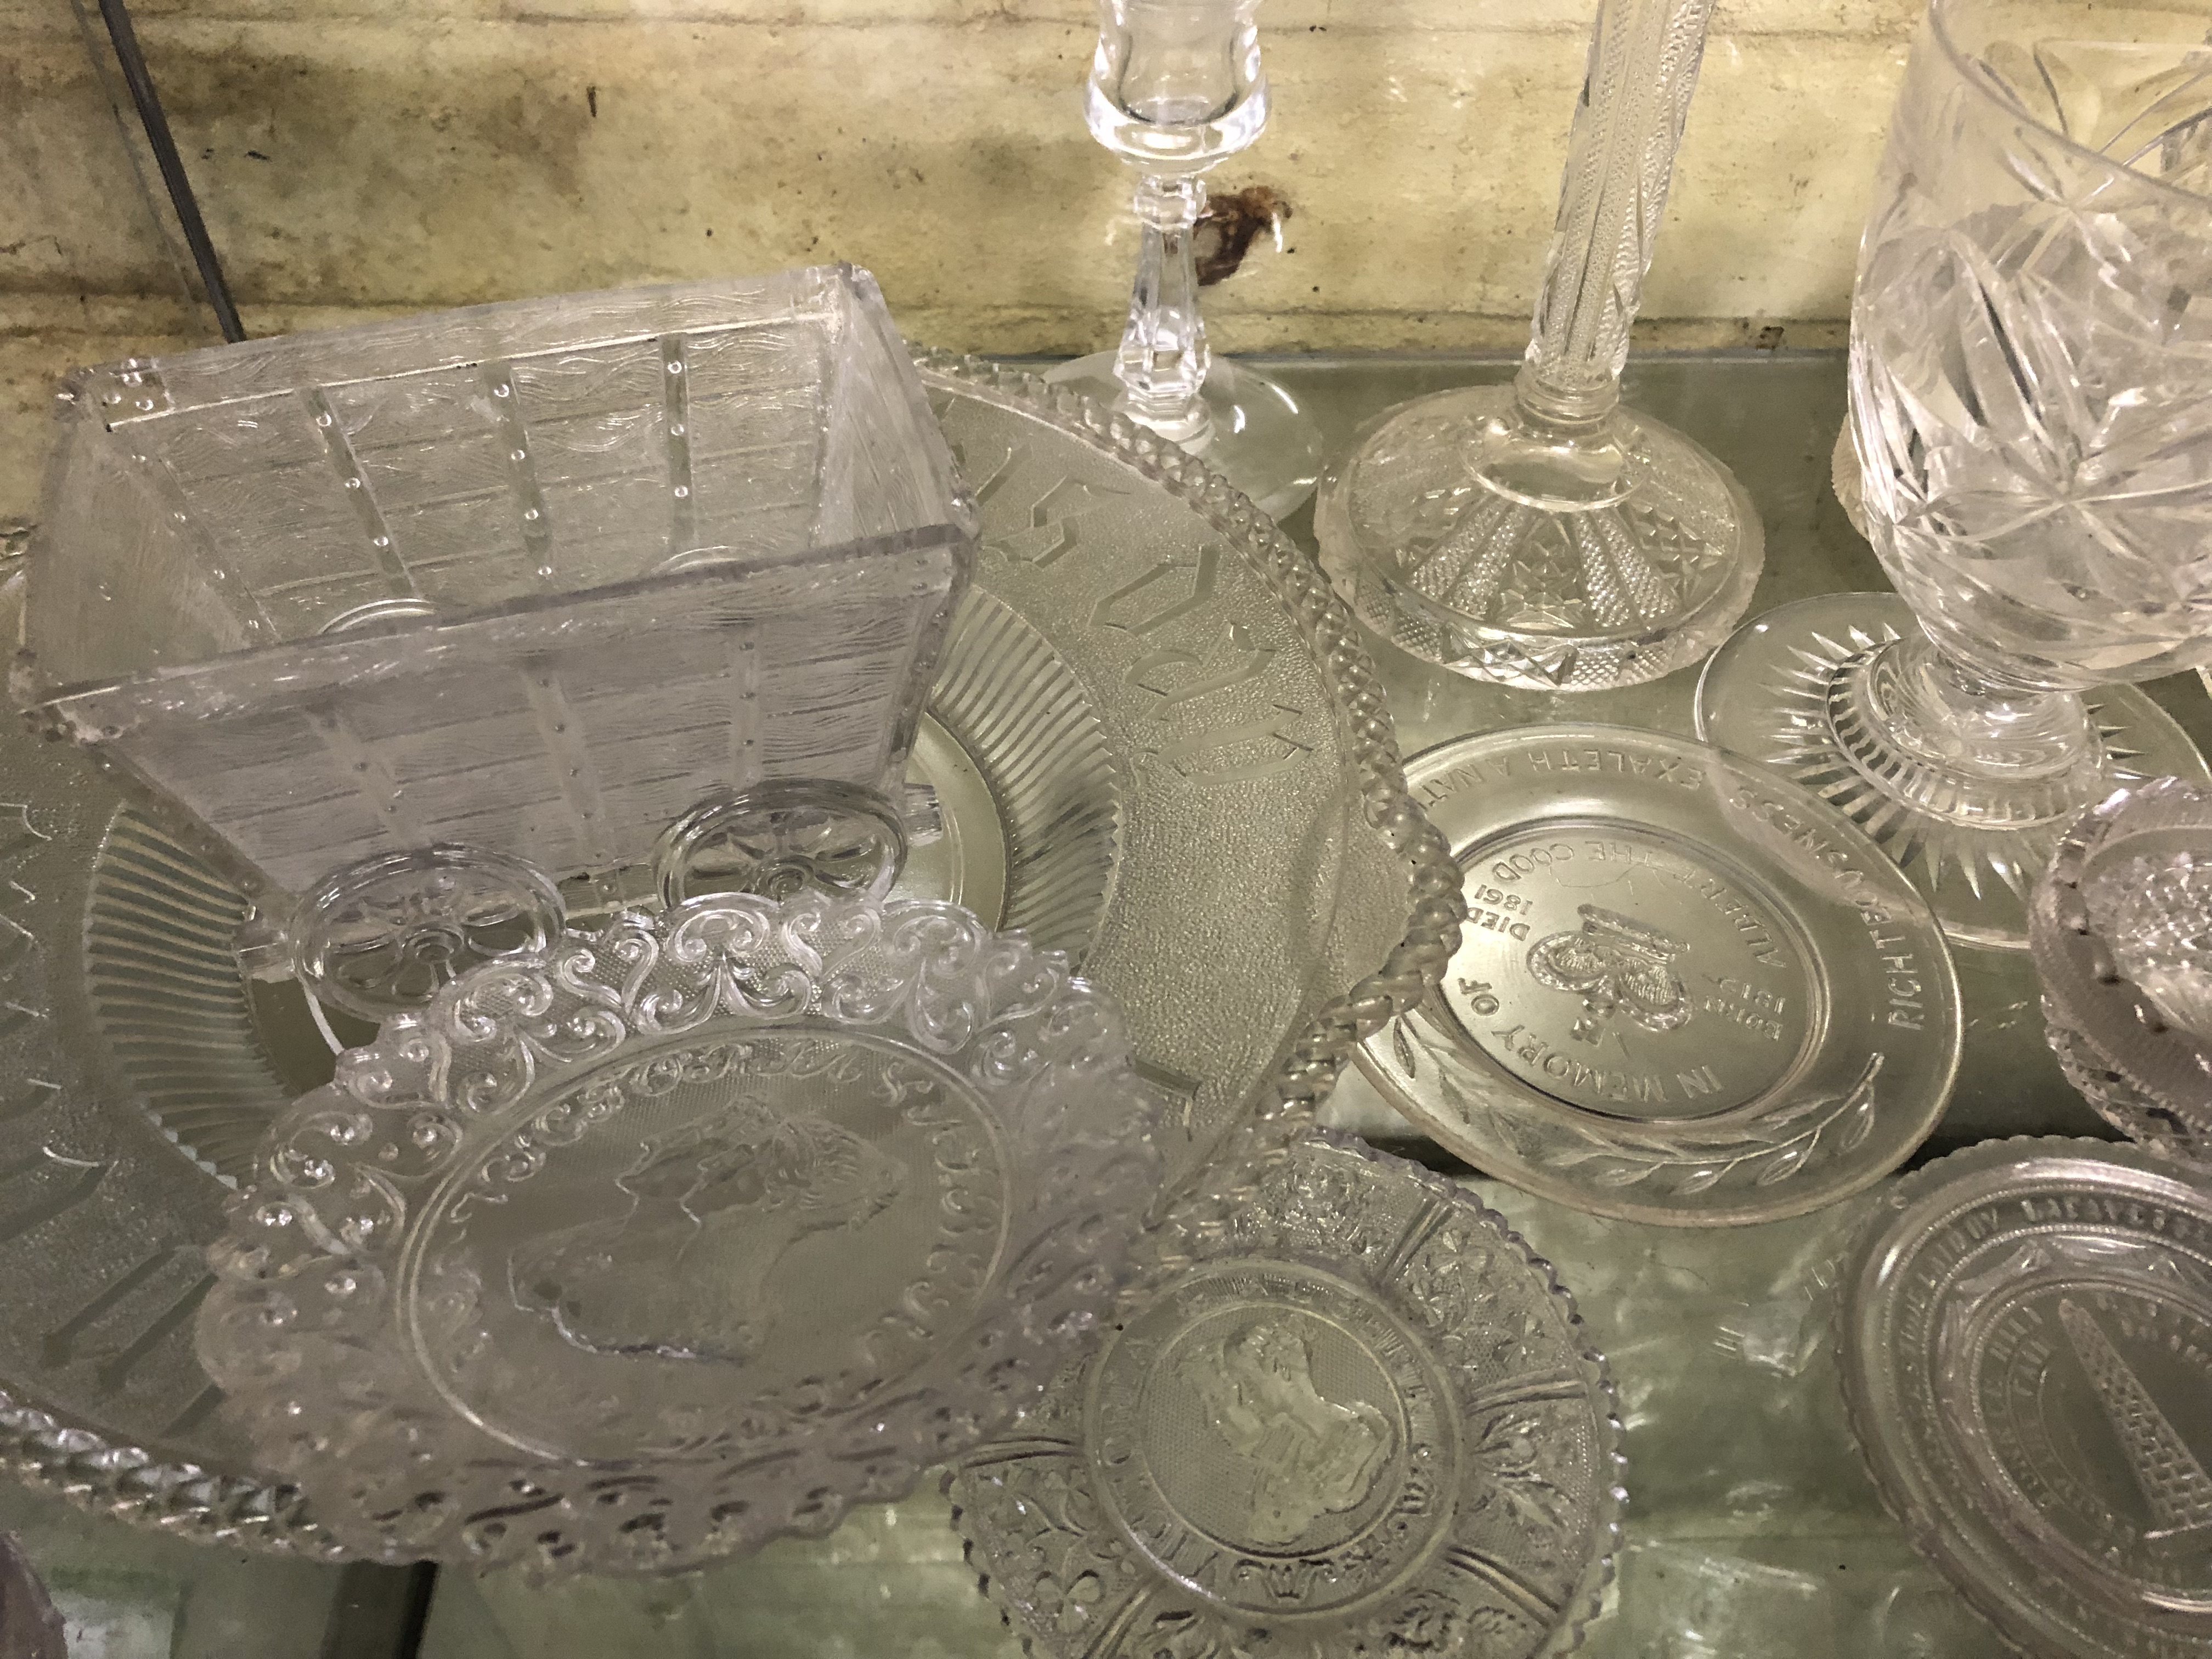 SELECTION OF MAINLY 19TH CENTURY PRESSED GLASSWARE BY SOWERBY, GREENER, SMALL COMMEMORATIVE DISHES, - Image 4 of 5